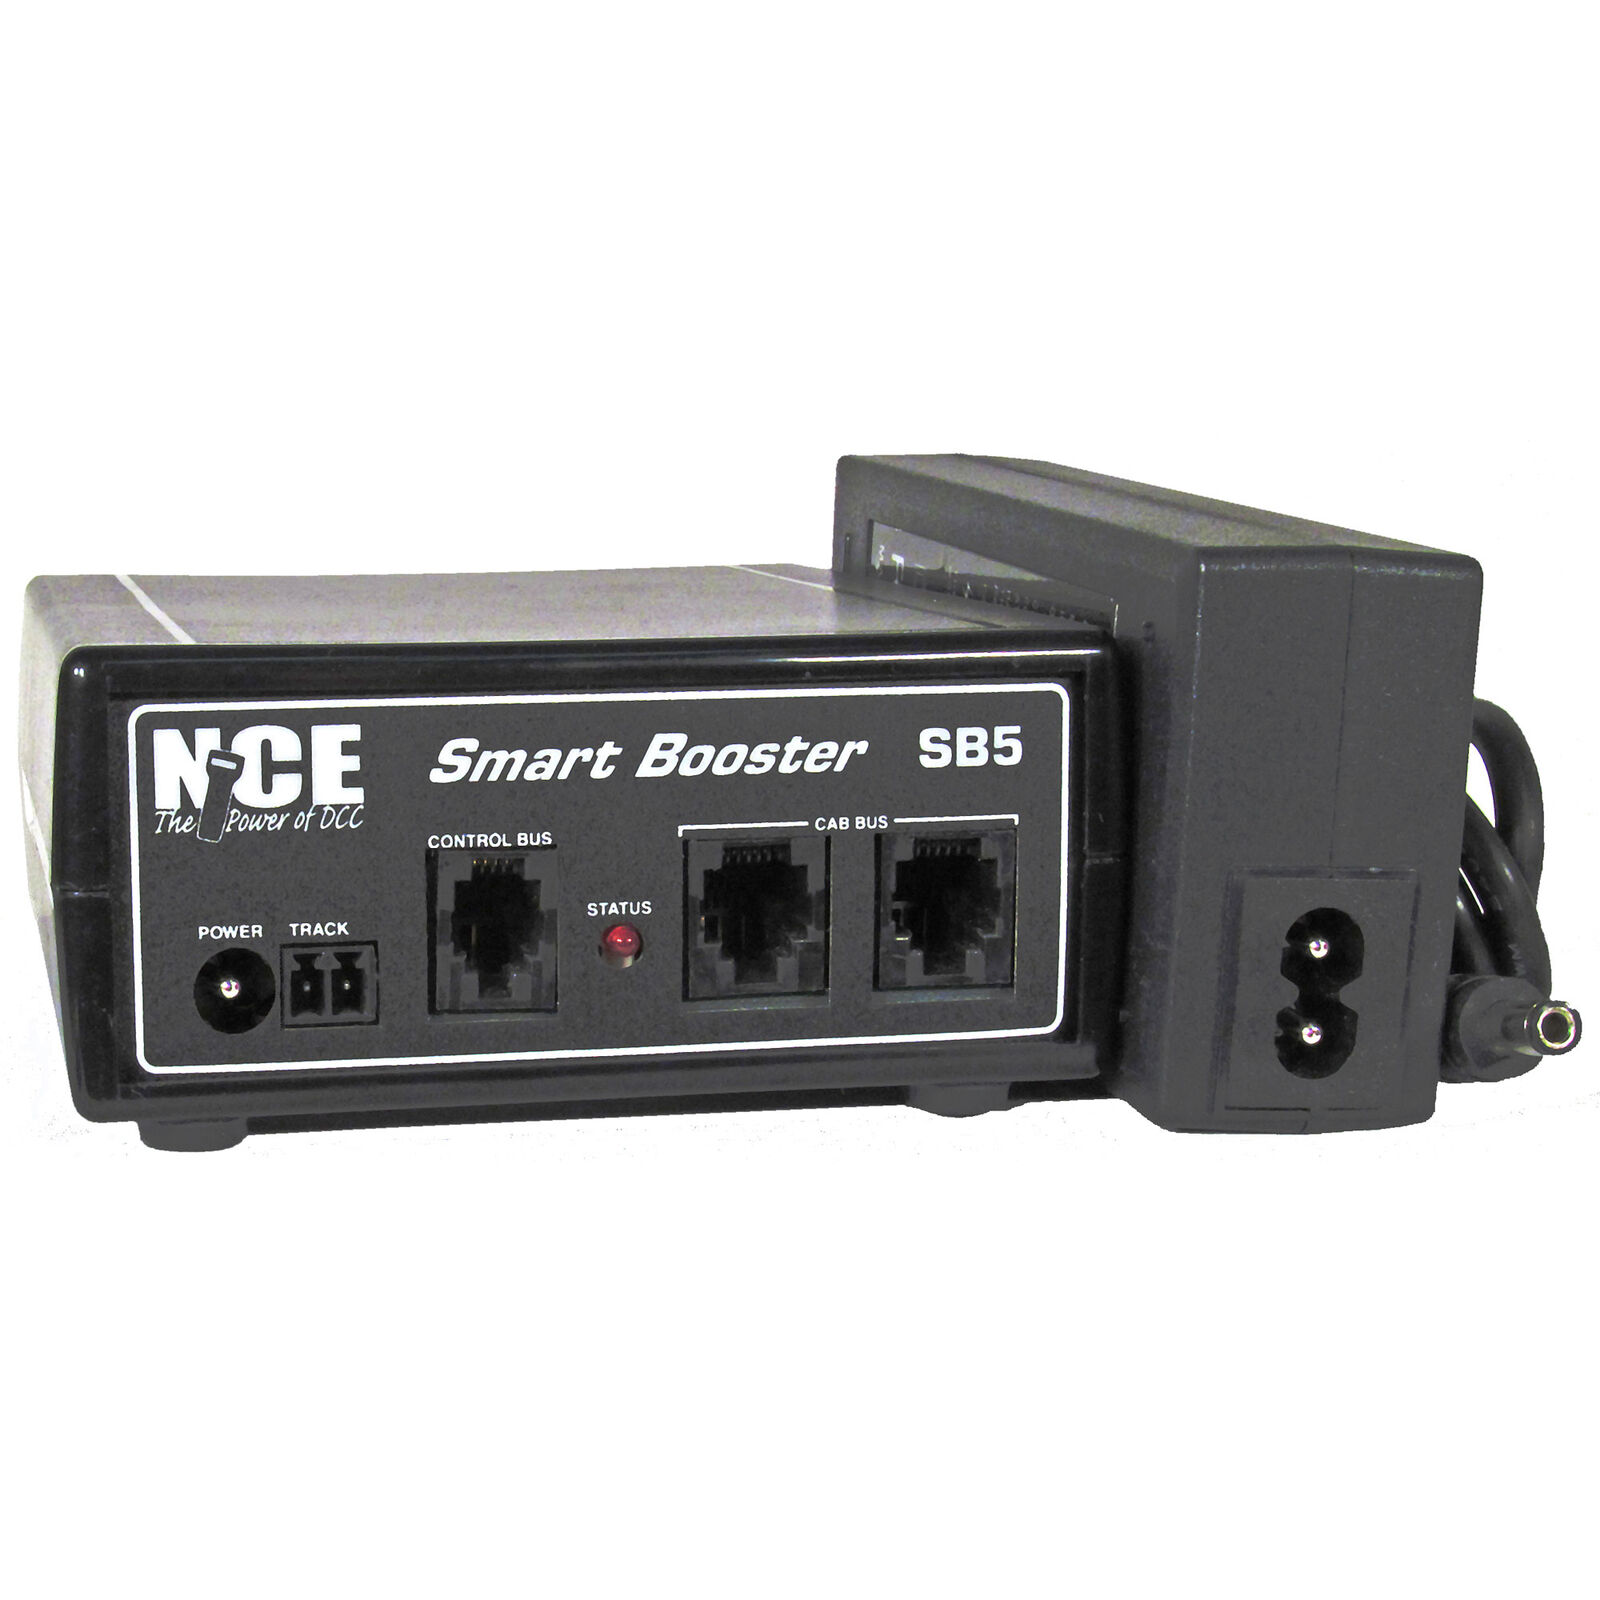 Smart Booster with P514, SB5/5A